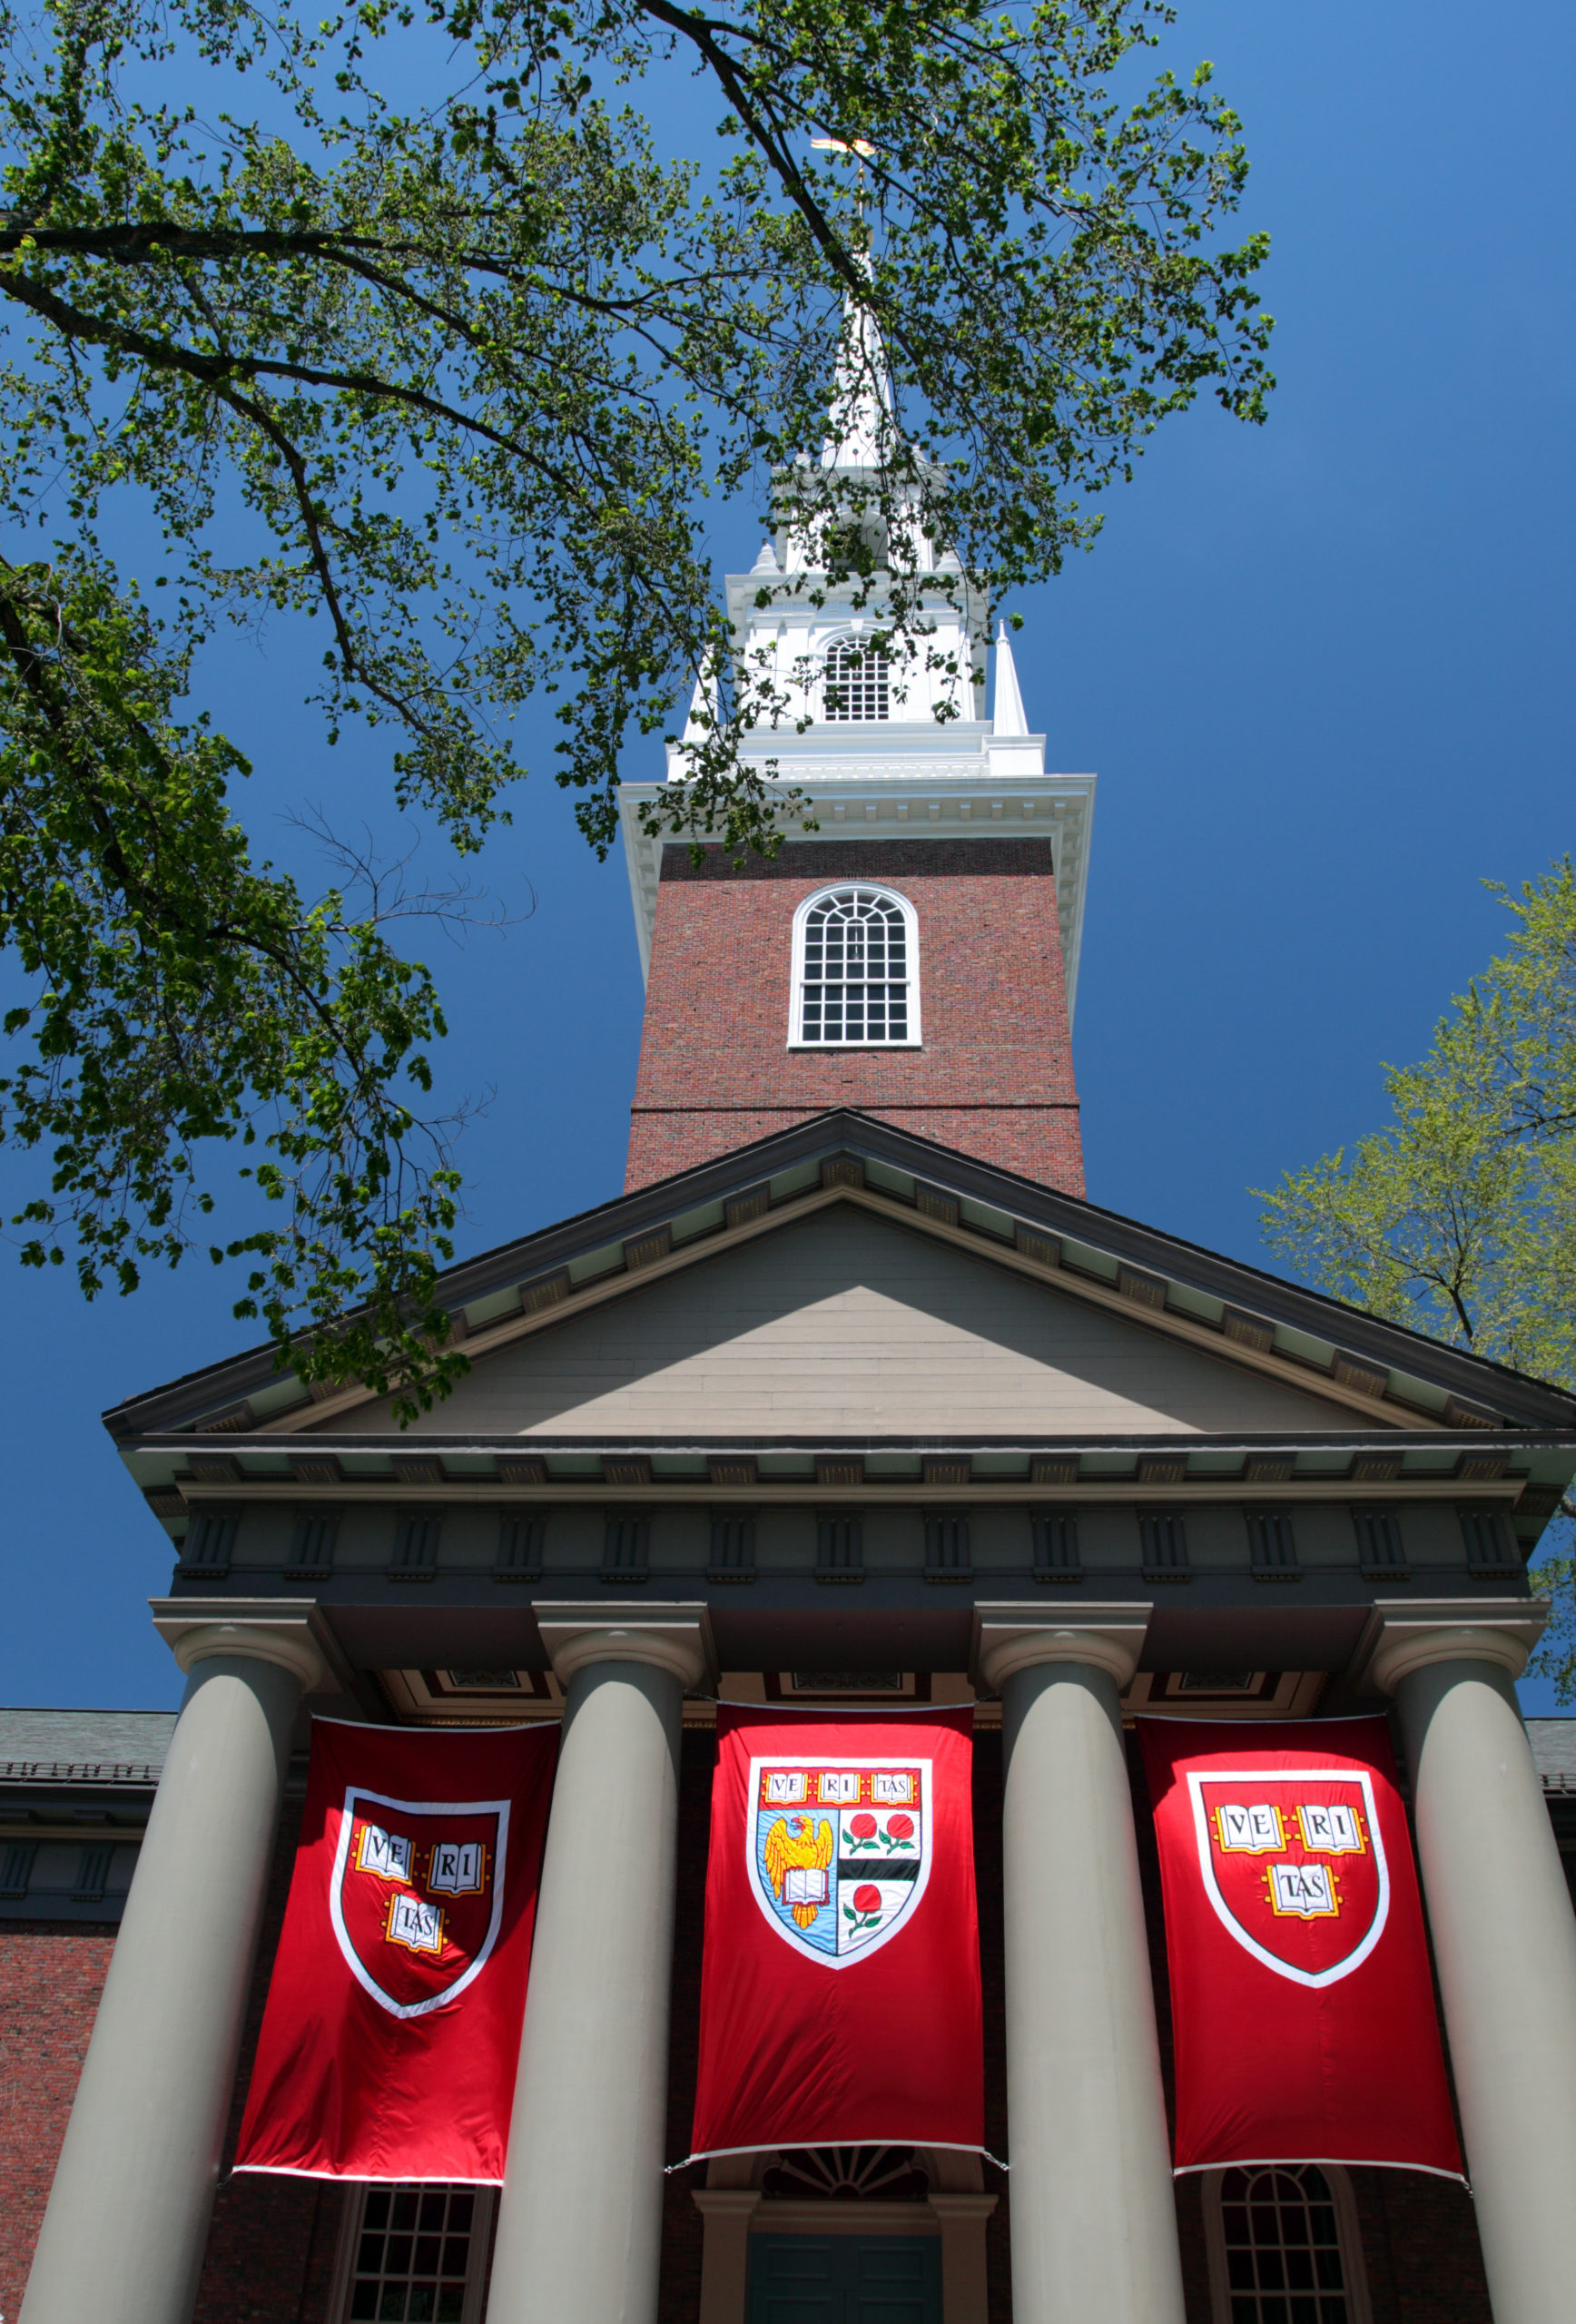 Harvard is the oldest institution of higher learning in the United States